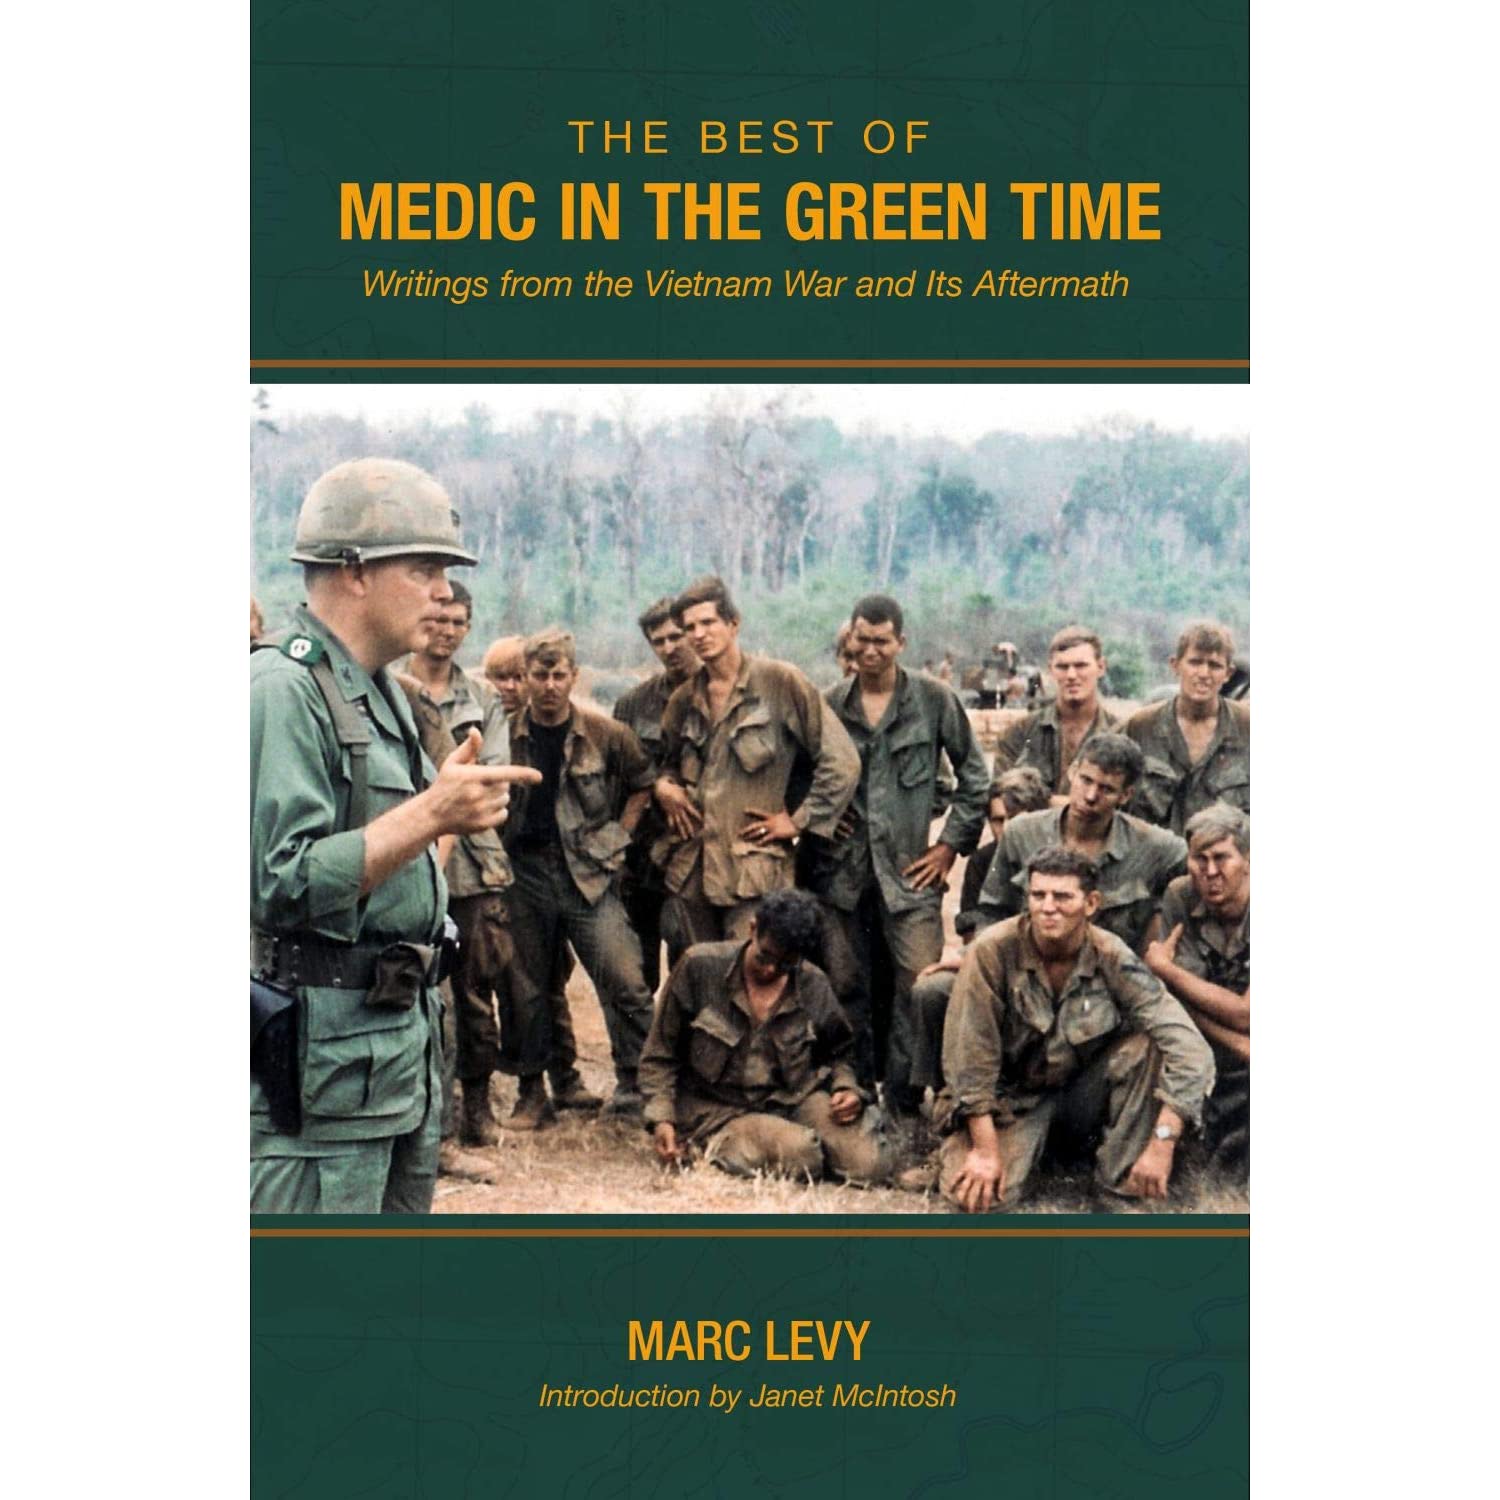 Medic in the Green Time